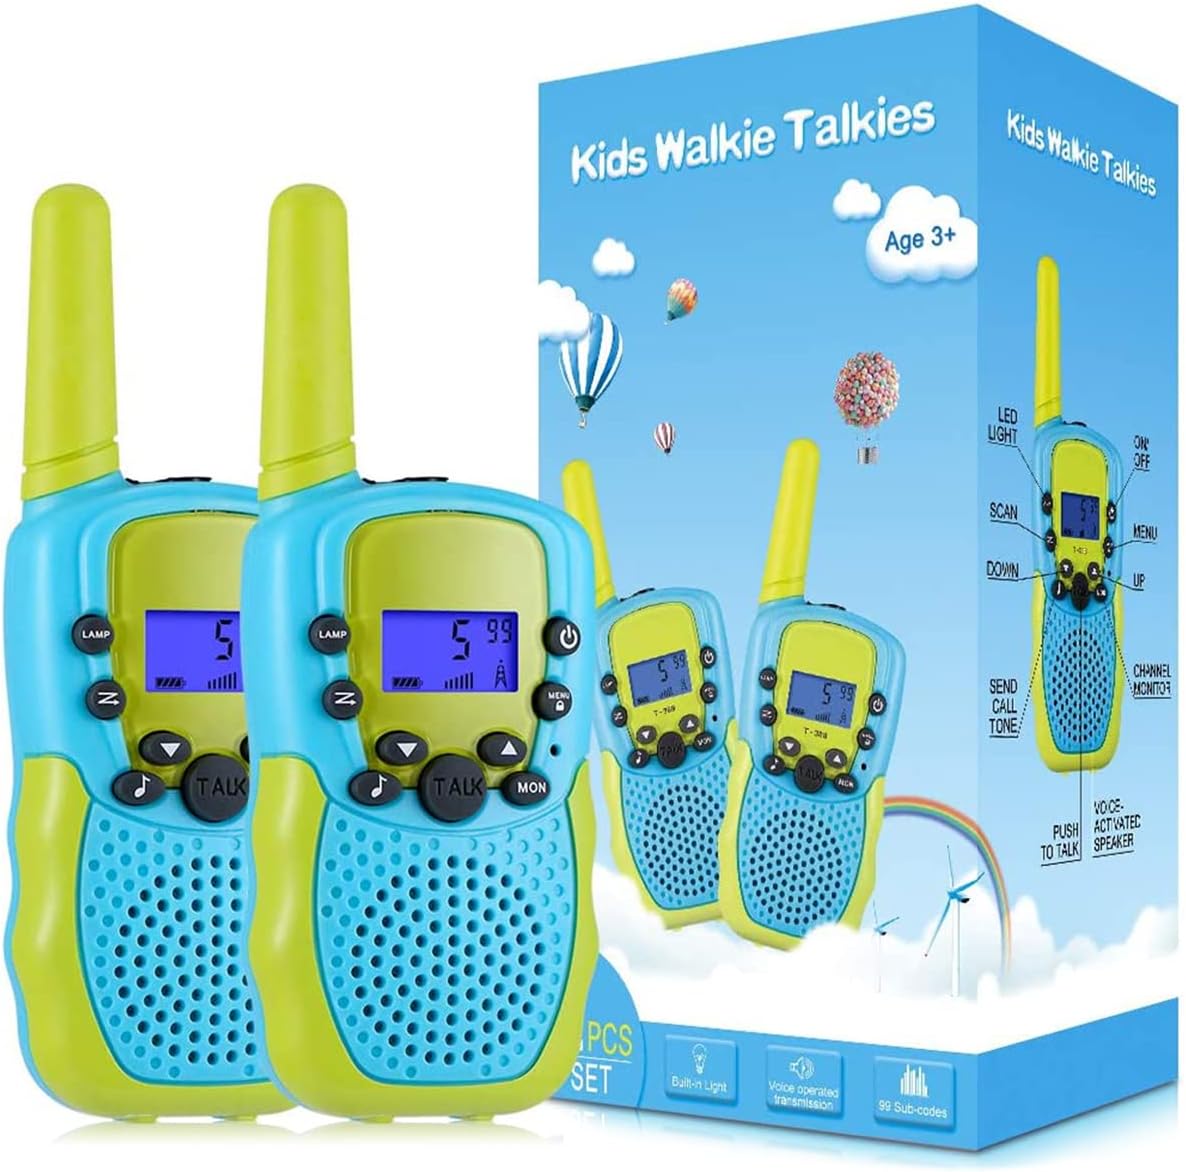 Kearui Toys for 3-12 Years Old Boys, Walkie Talkie Kids for Boys 8 Channels 2 Way Radio with VOX Function & LED Flashlight, 3 Miles Range for Outside Adventures, Camping, Hiking (Blue-Green)